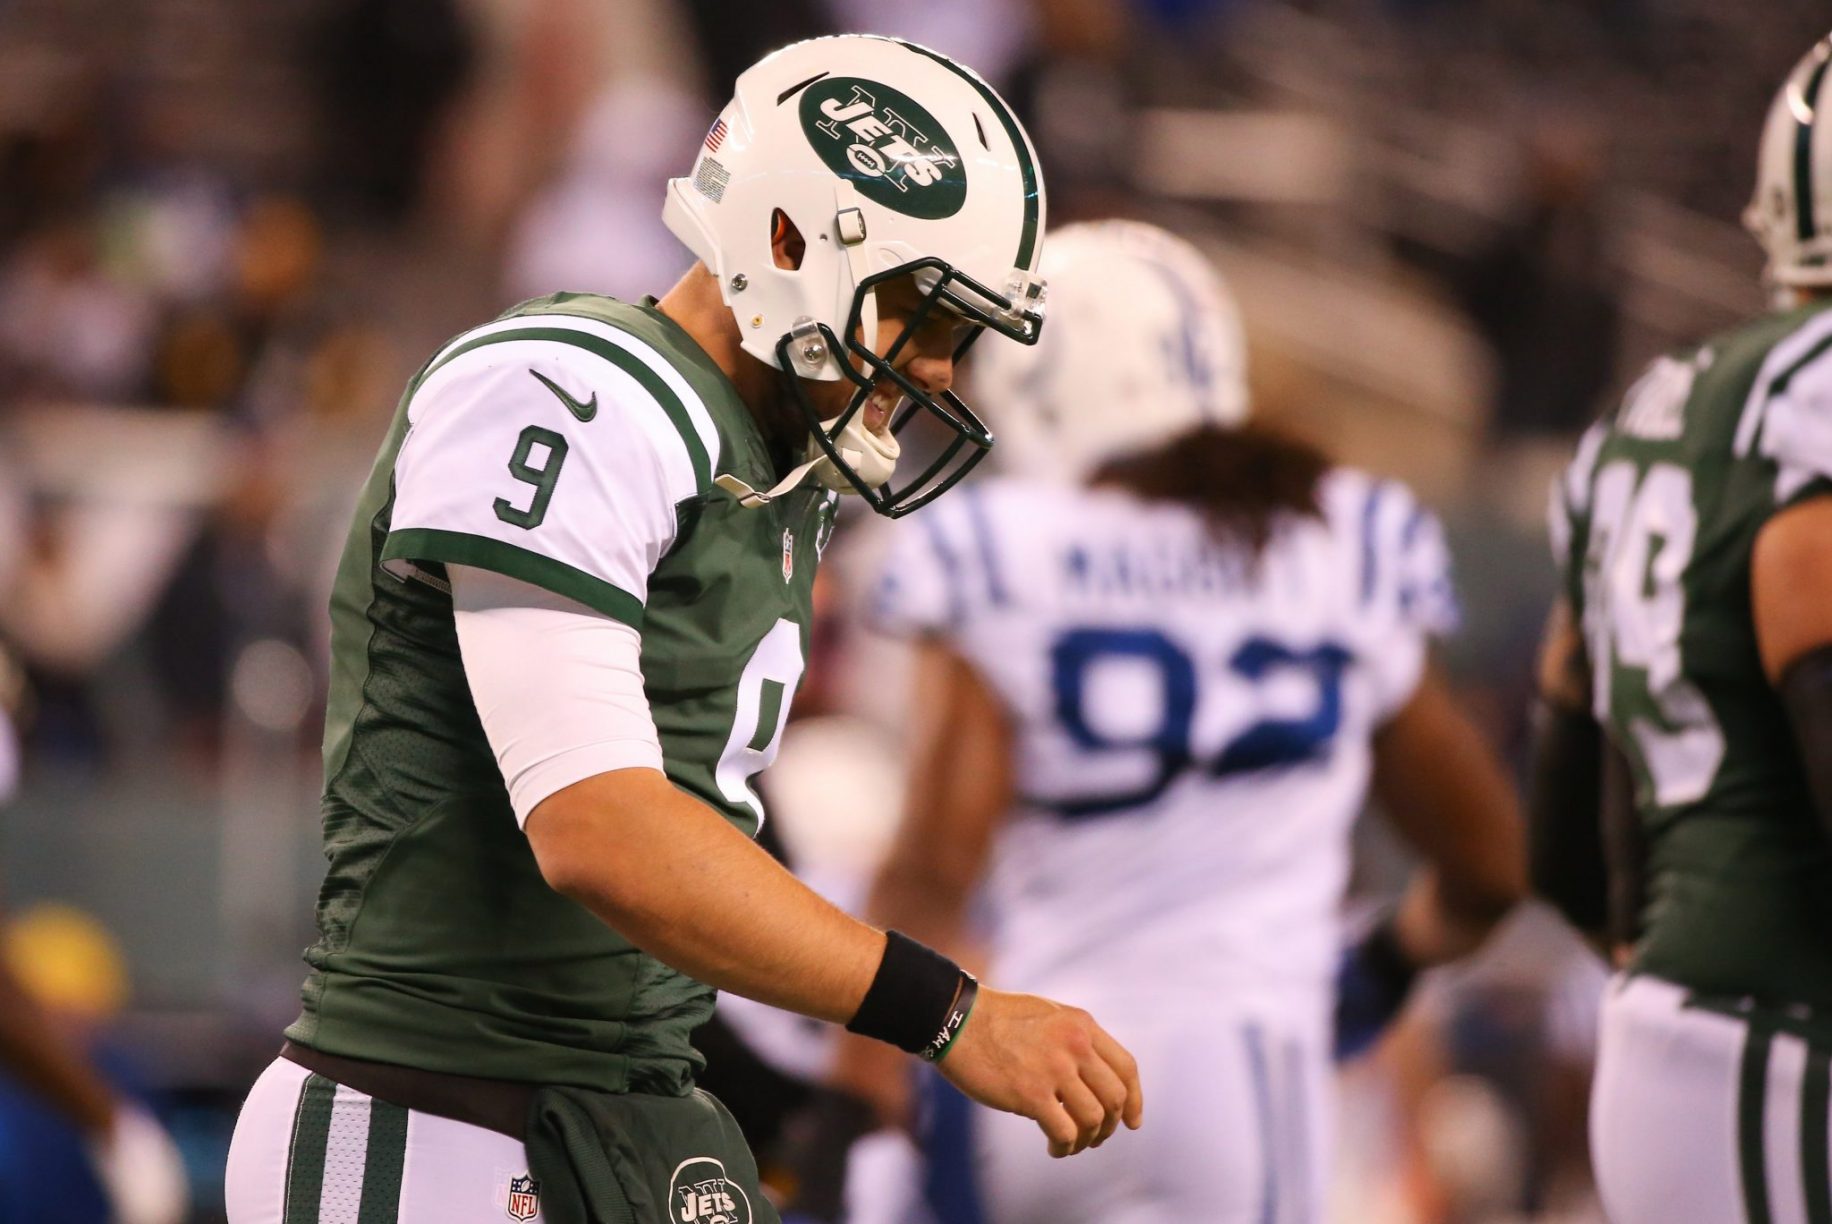 New York Jets' Bryce Petty had a rocky outing 